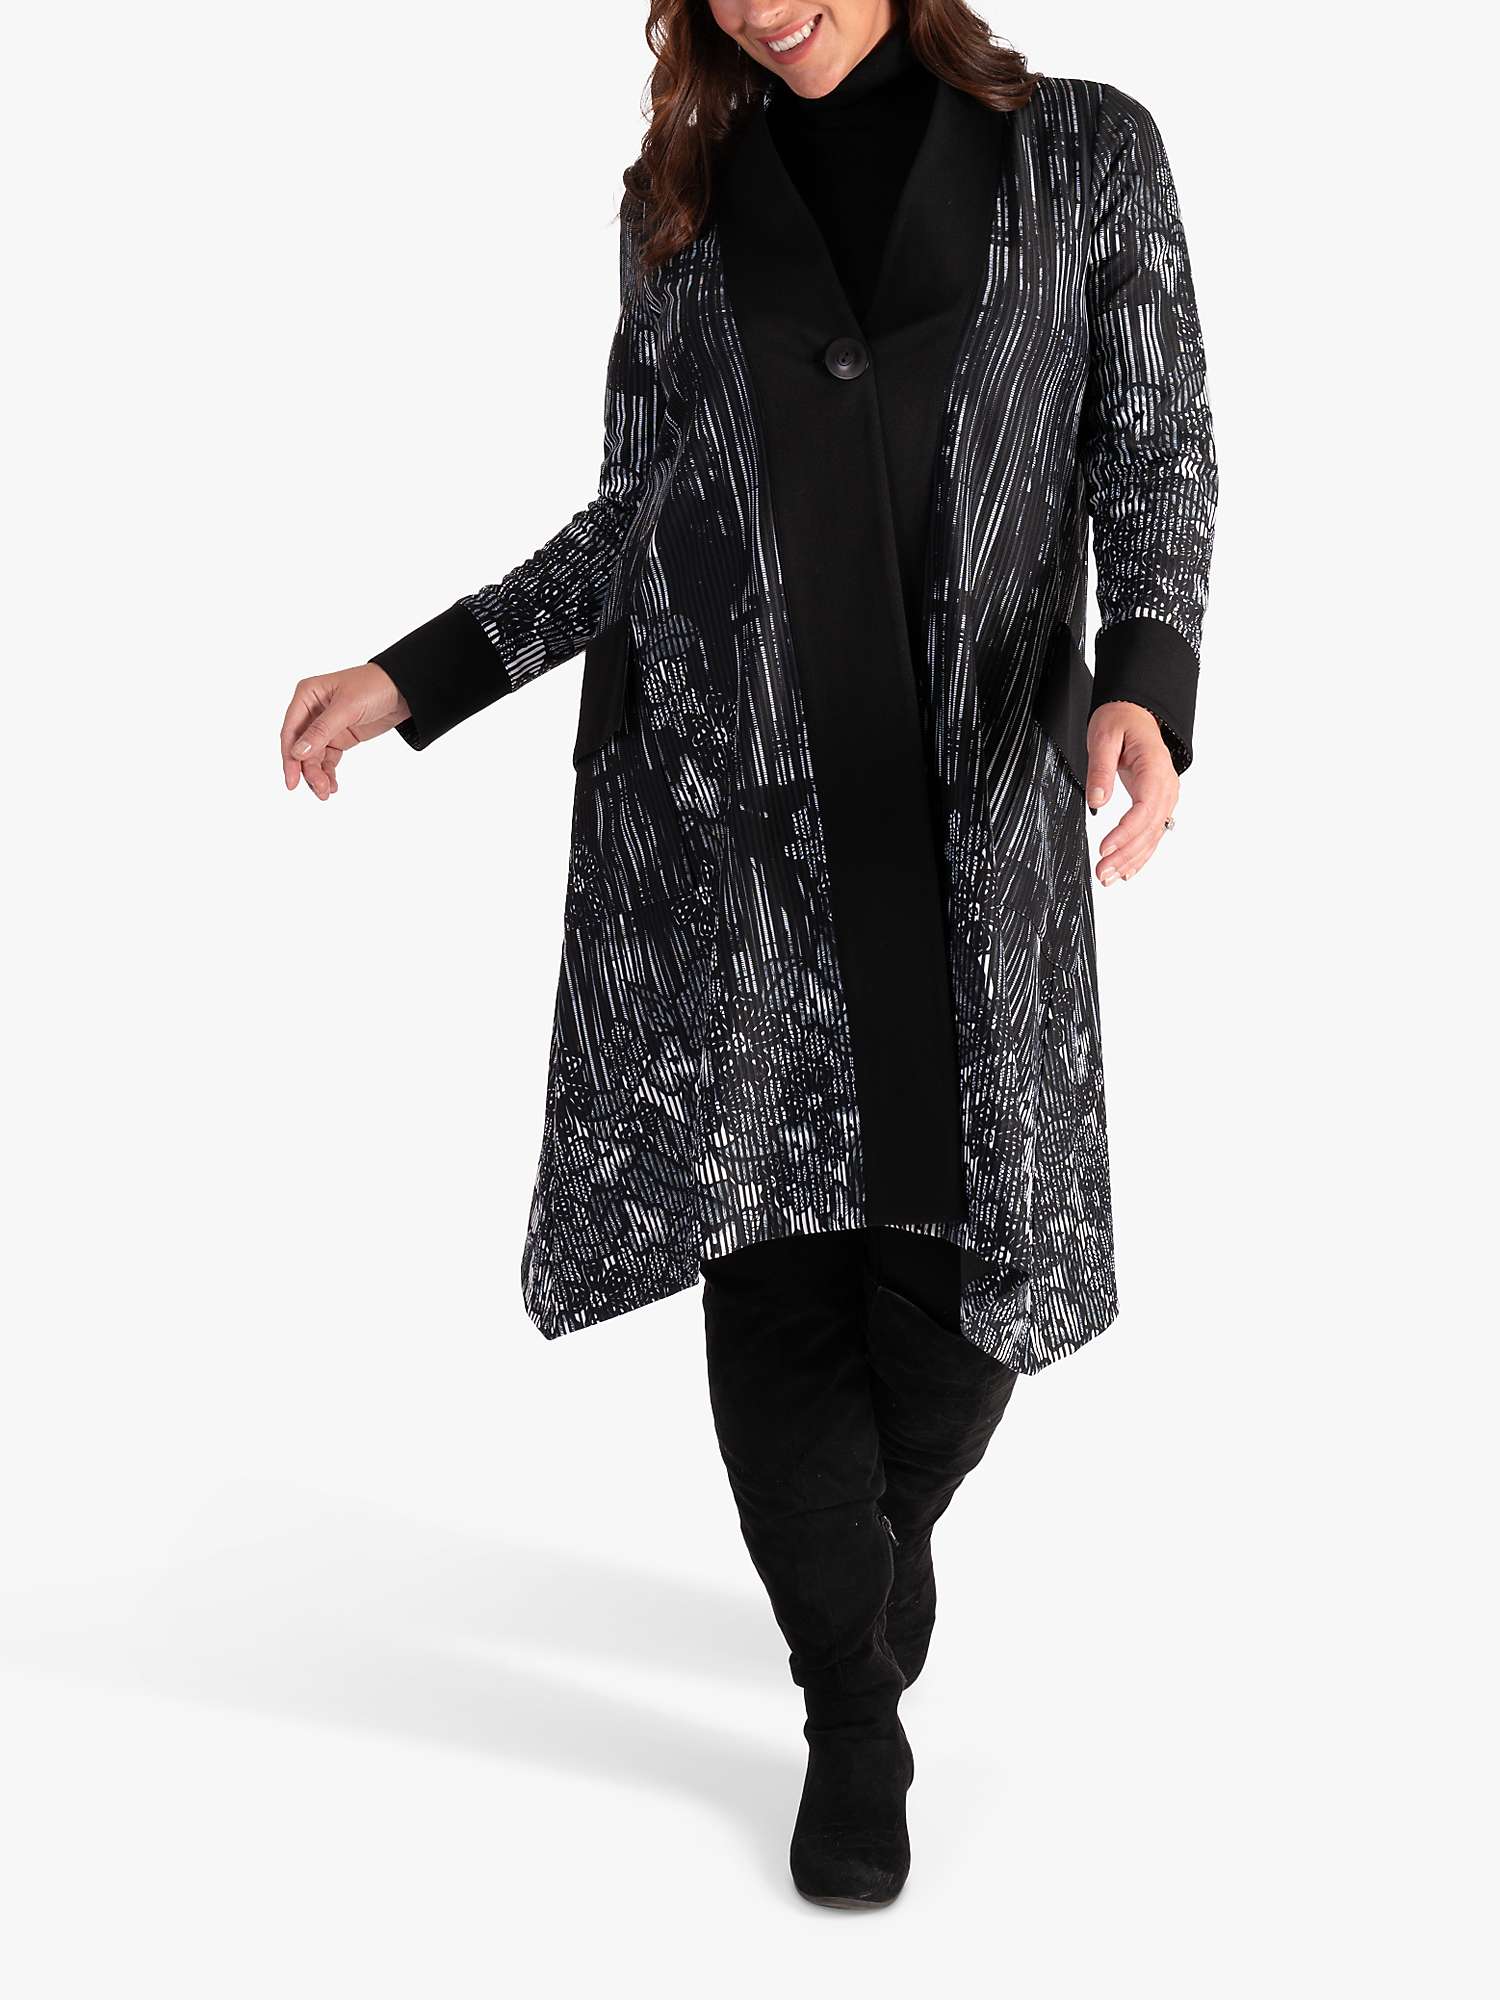 Buy chesca Abstract Floral Print Ribbed Coat, Black/White Online at johnlewis.com